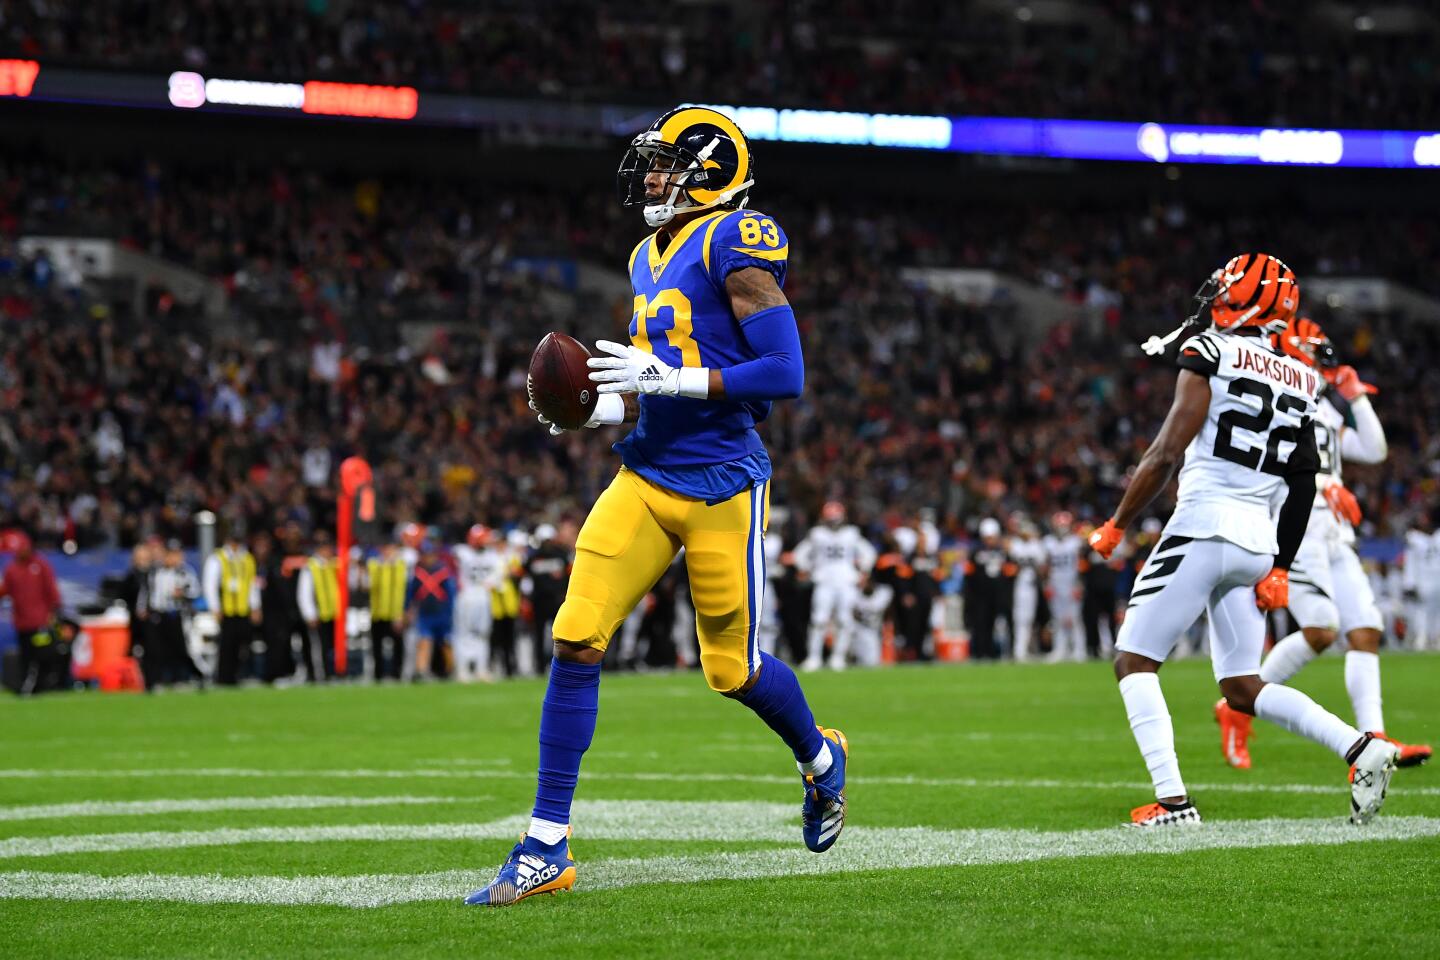 Rams receiver Josh Reynolds beats the Bengals defense for a touchdown.